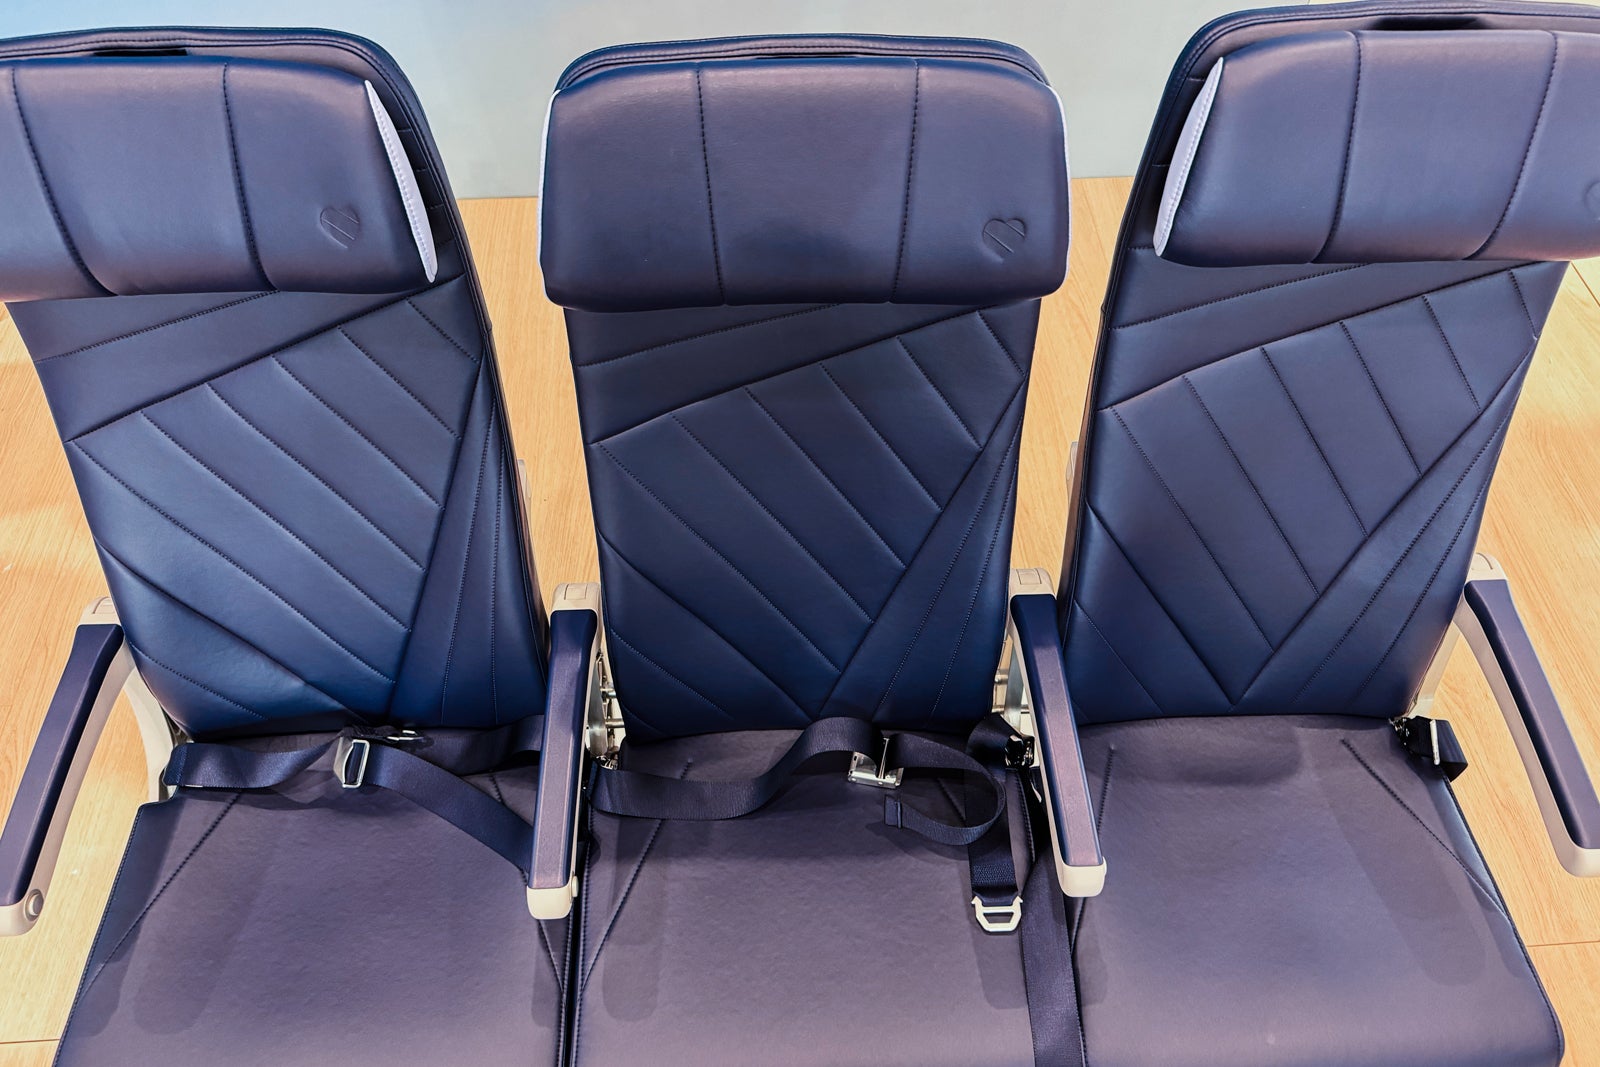 New Southwest seats on Boeing 737s